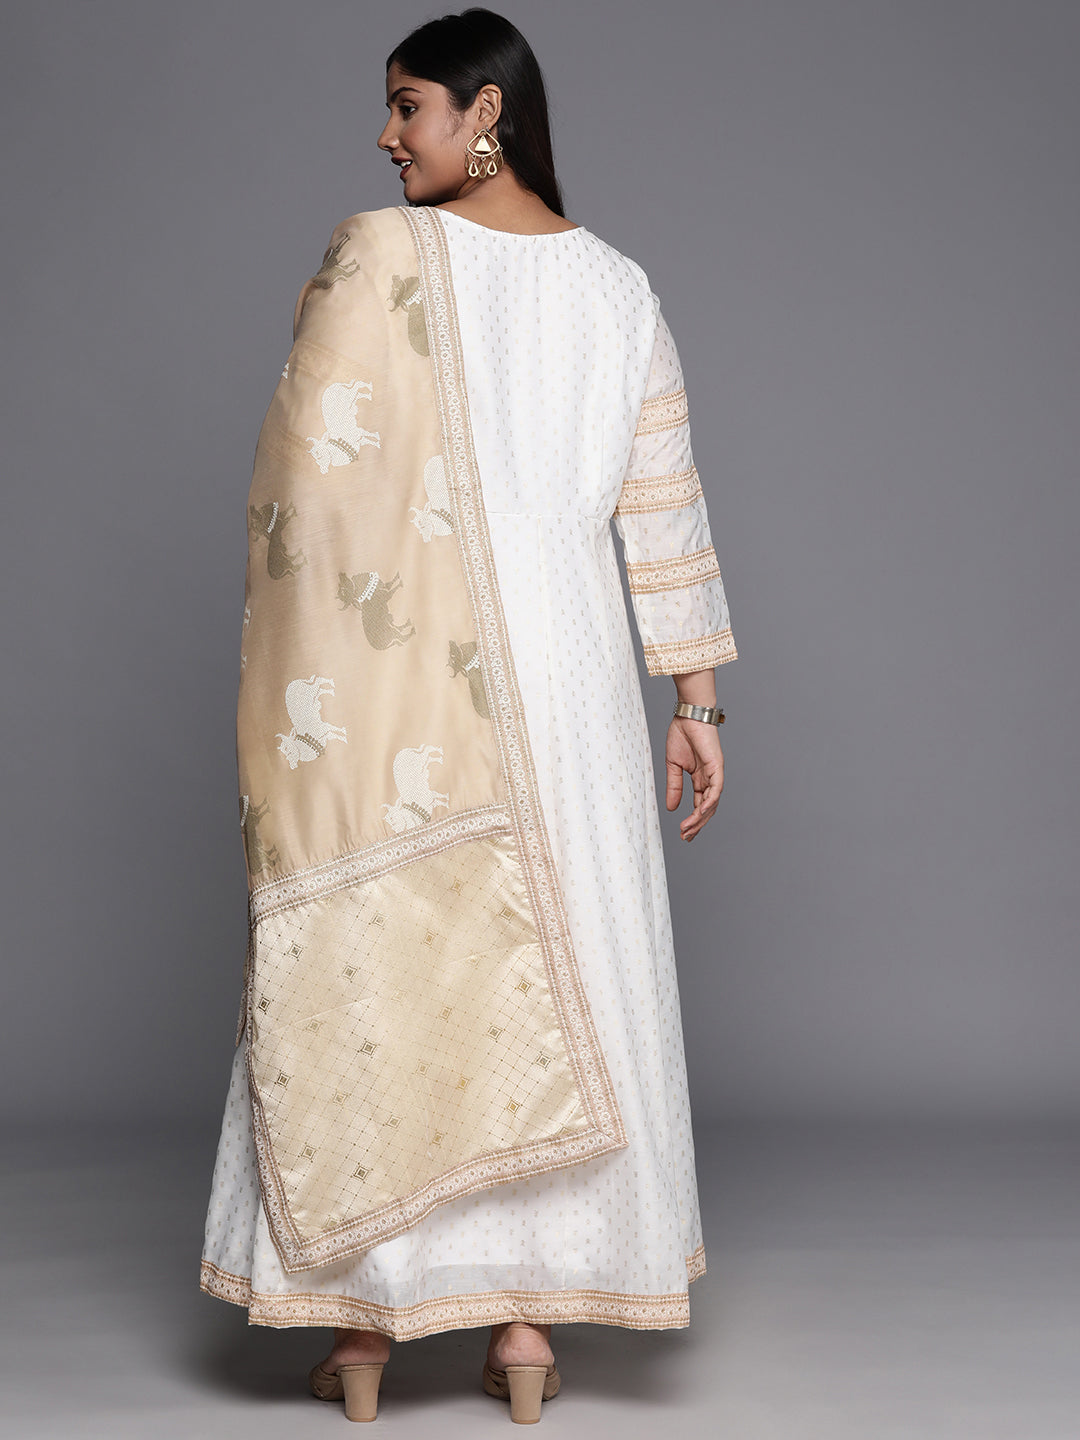 Off White & Gold Printed Plus Size Maxi Ethnic Dress With Dupatta